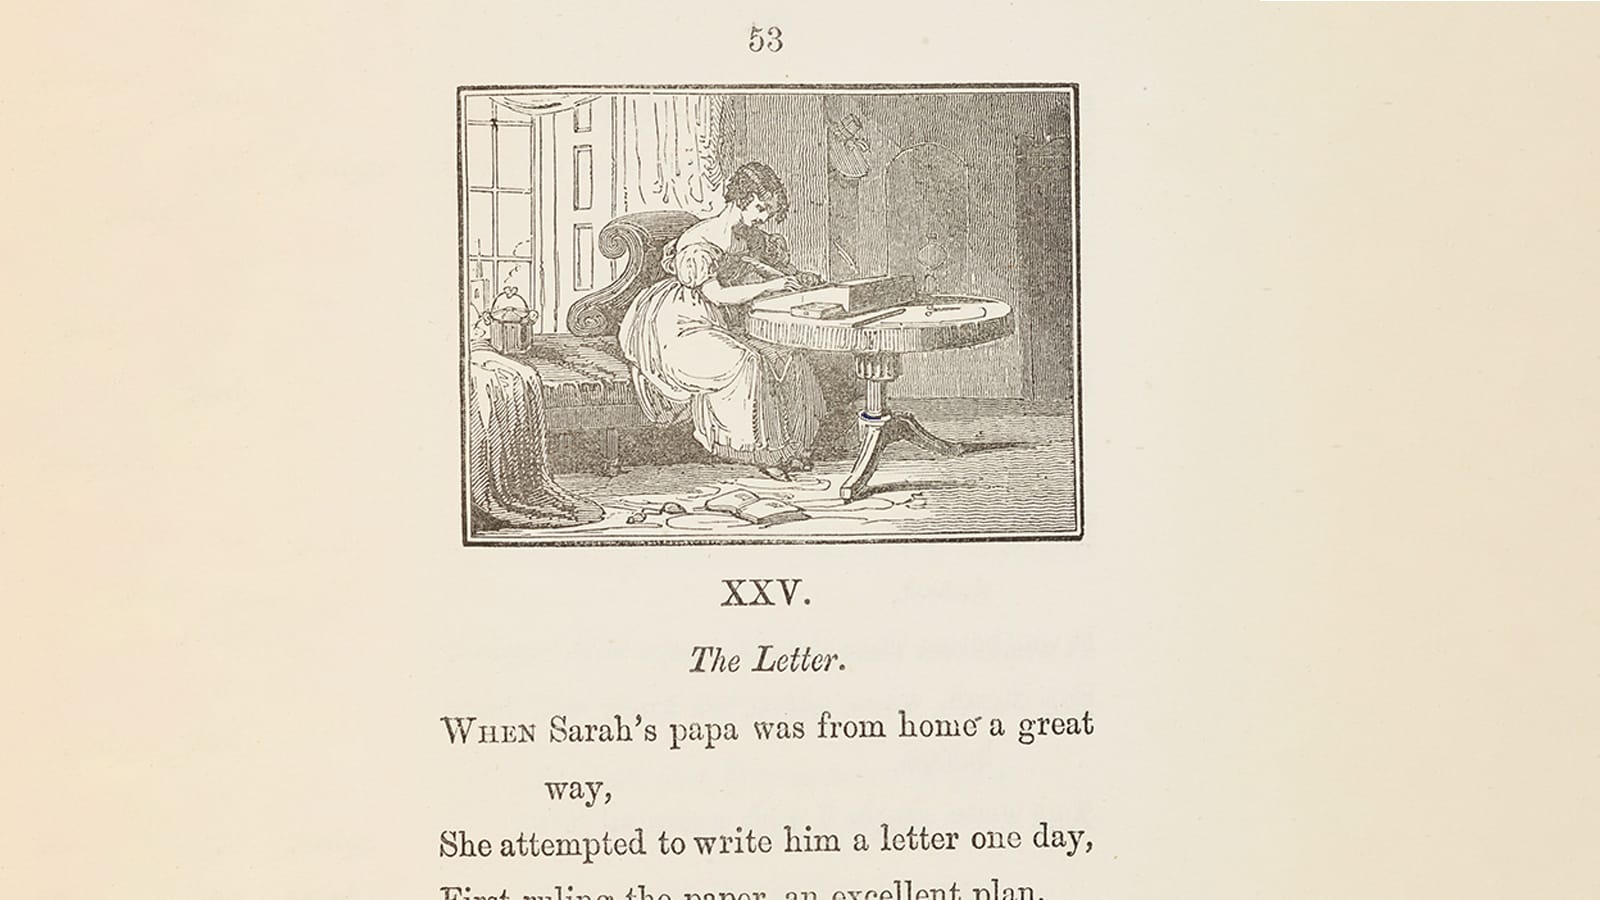 An old page from a book with an image of a woman writing